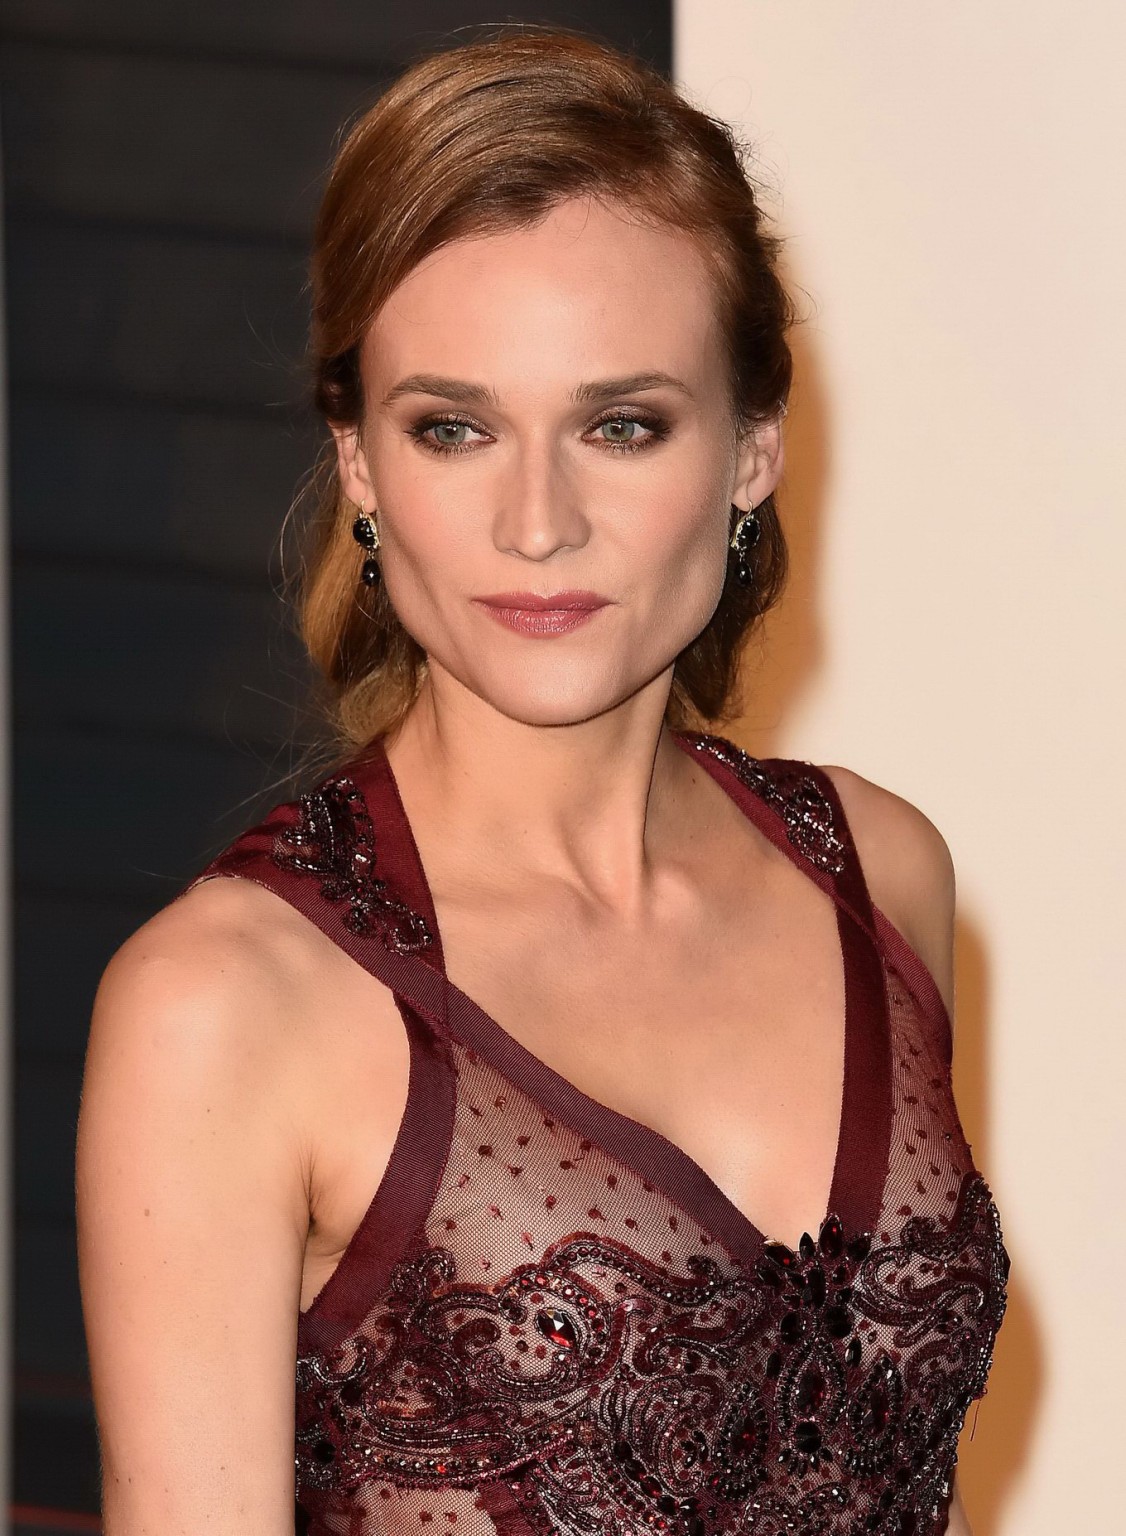 Diane Kruger shows off her boobs and ass in sheer dress #75145406